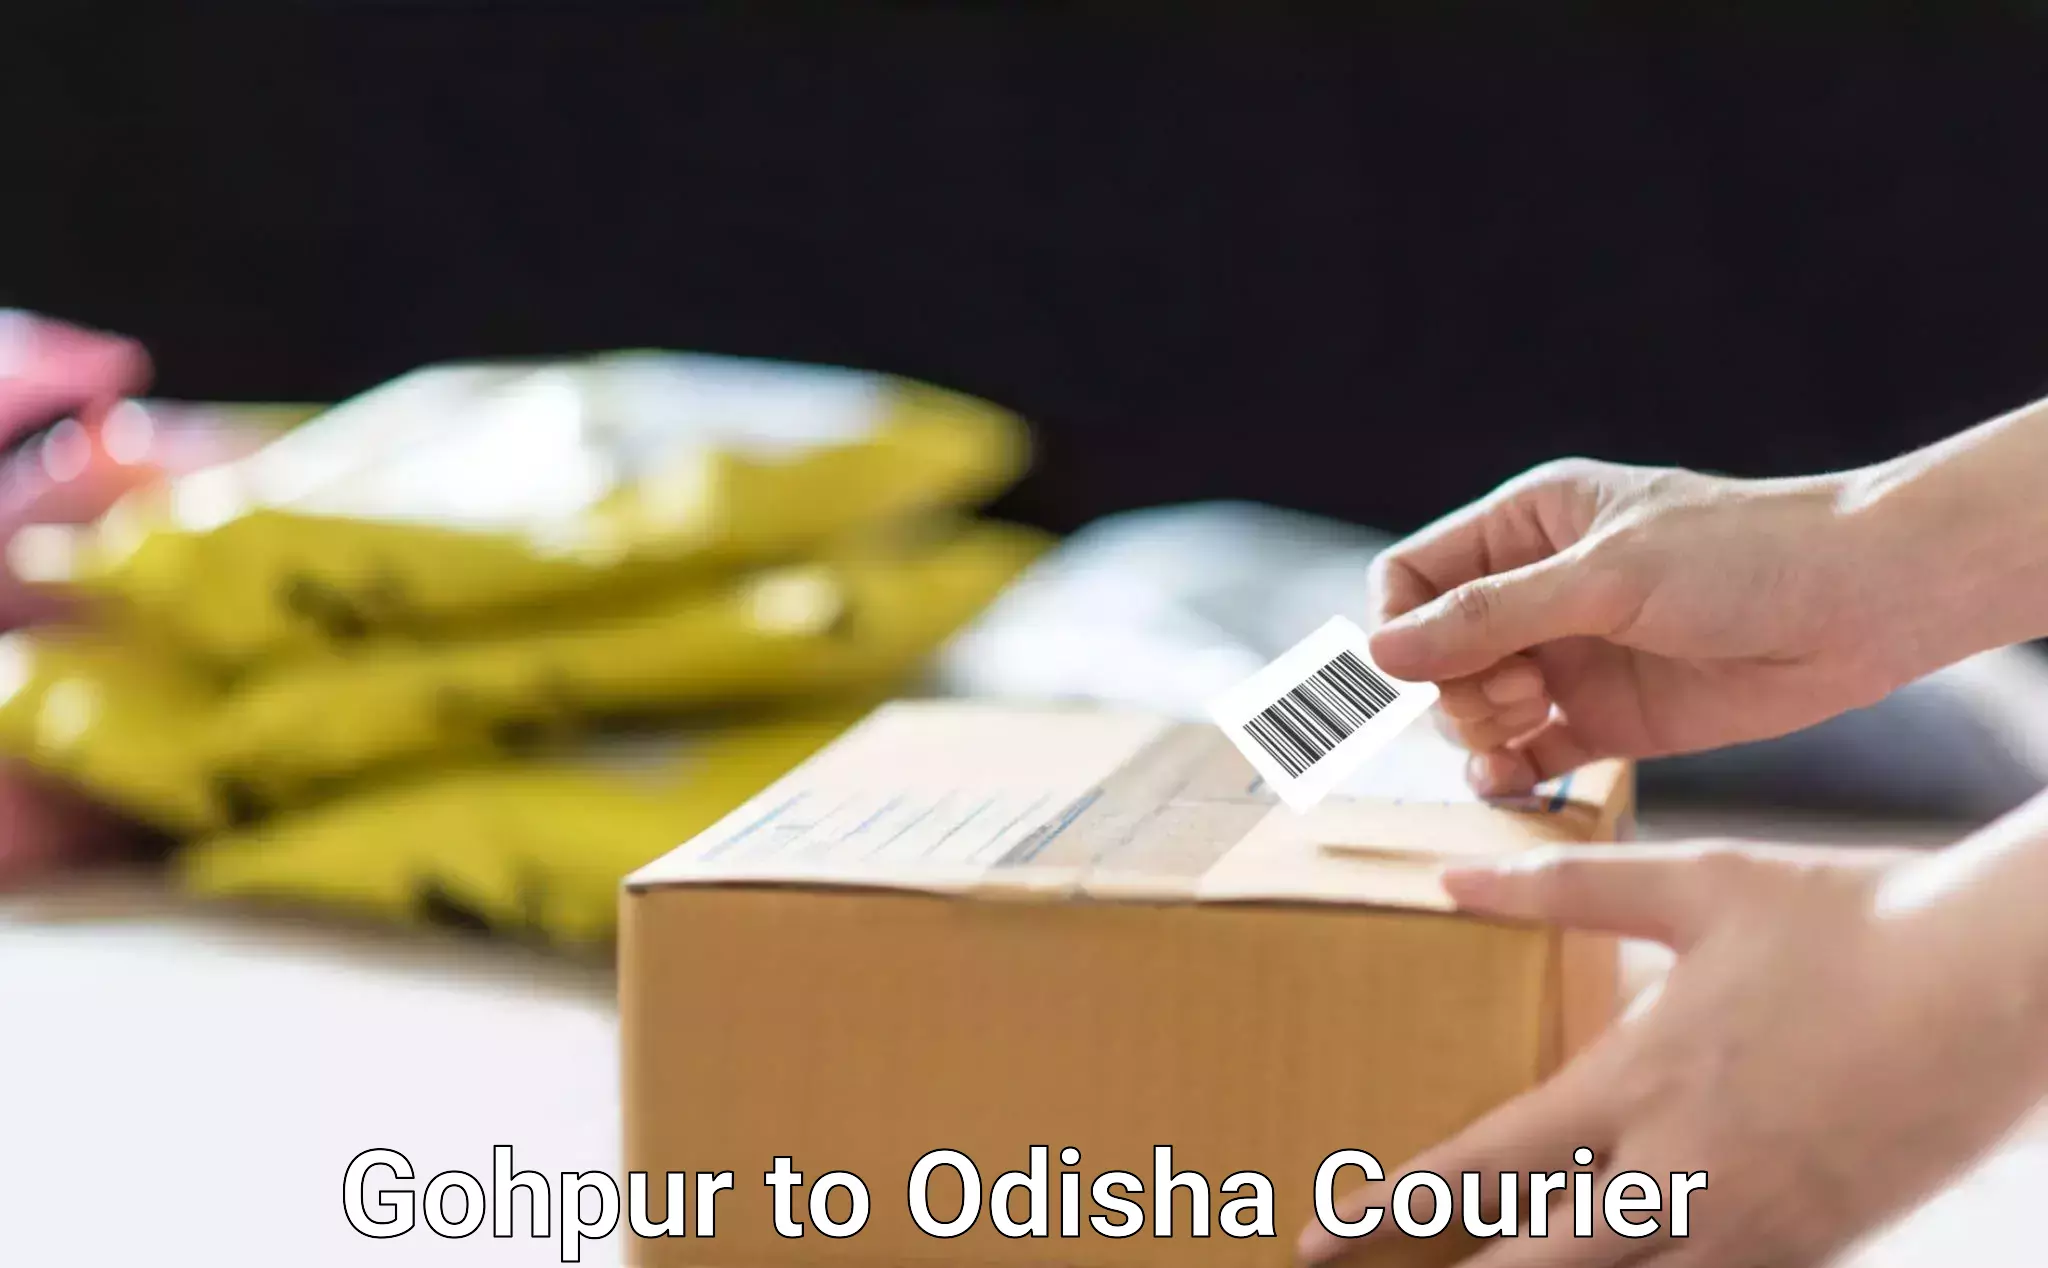 User-friendly courier app Gohpur to Dunguripali